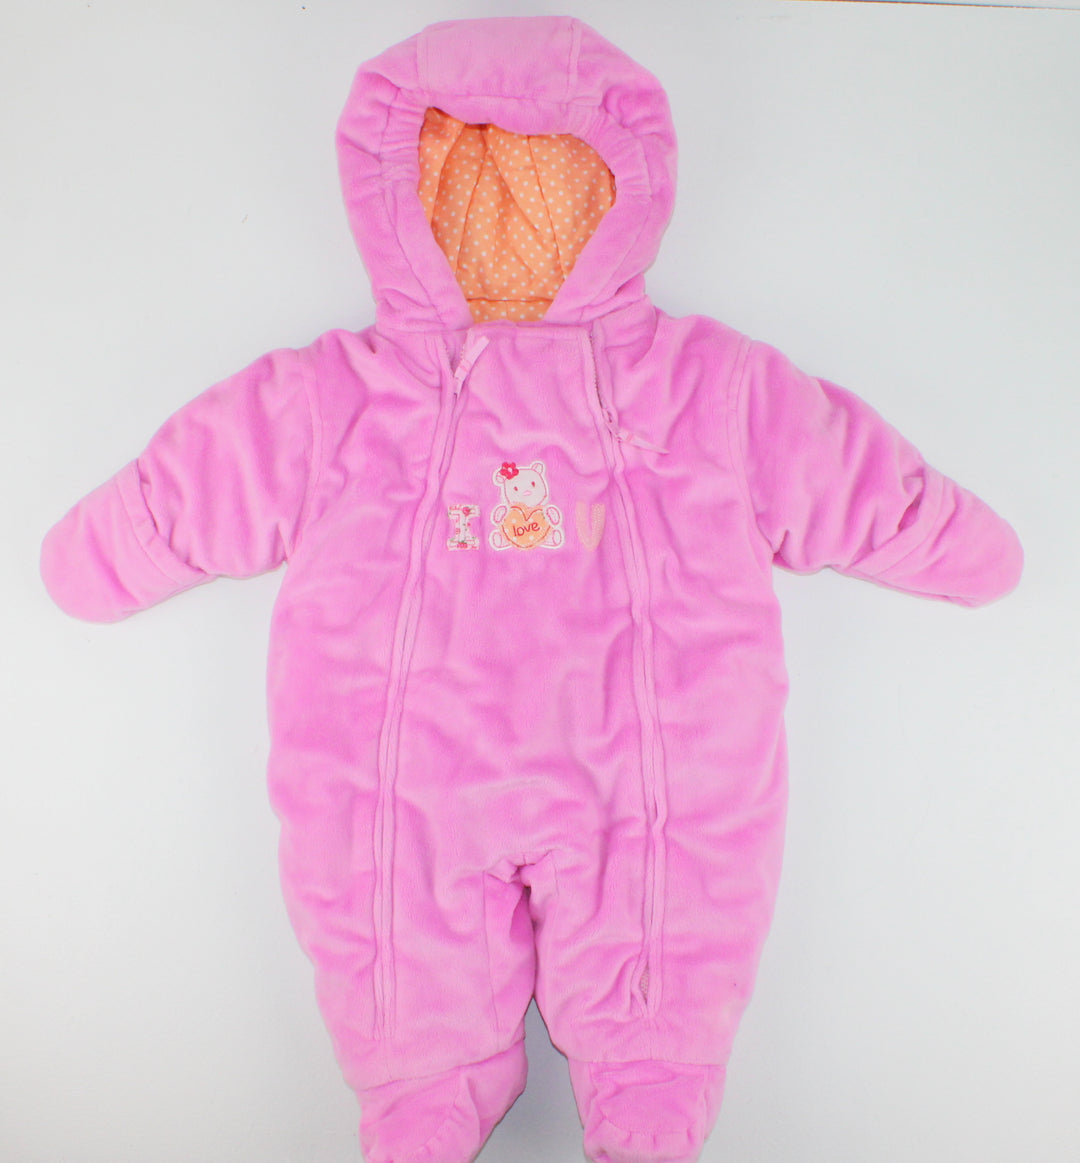 CARTERS THICK FLEECY PINK "I LOVE YOU" OUTERWEAR 3-6M EUC